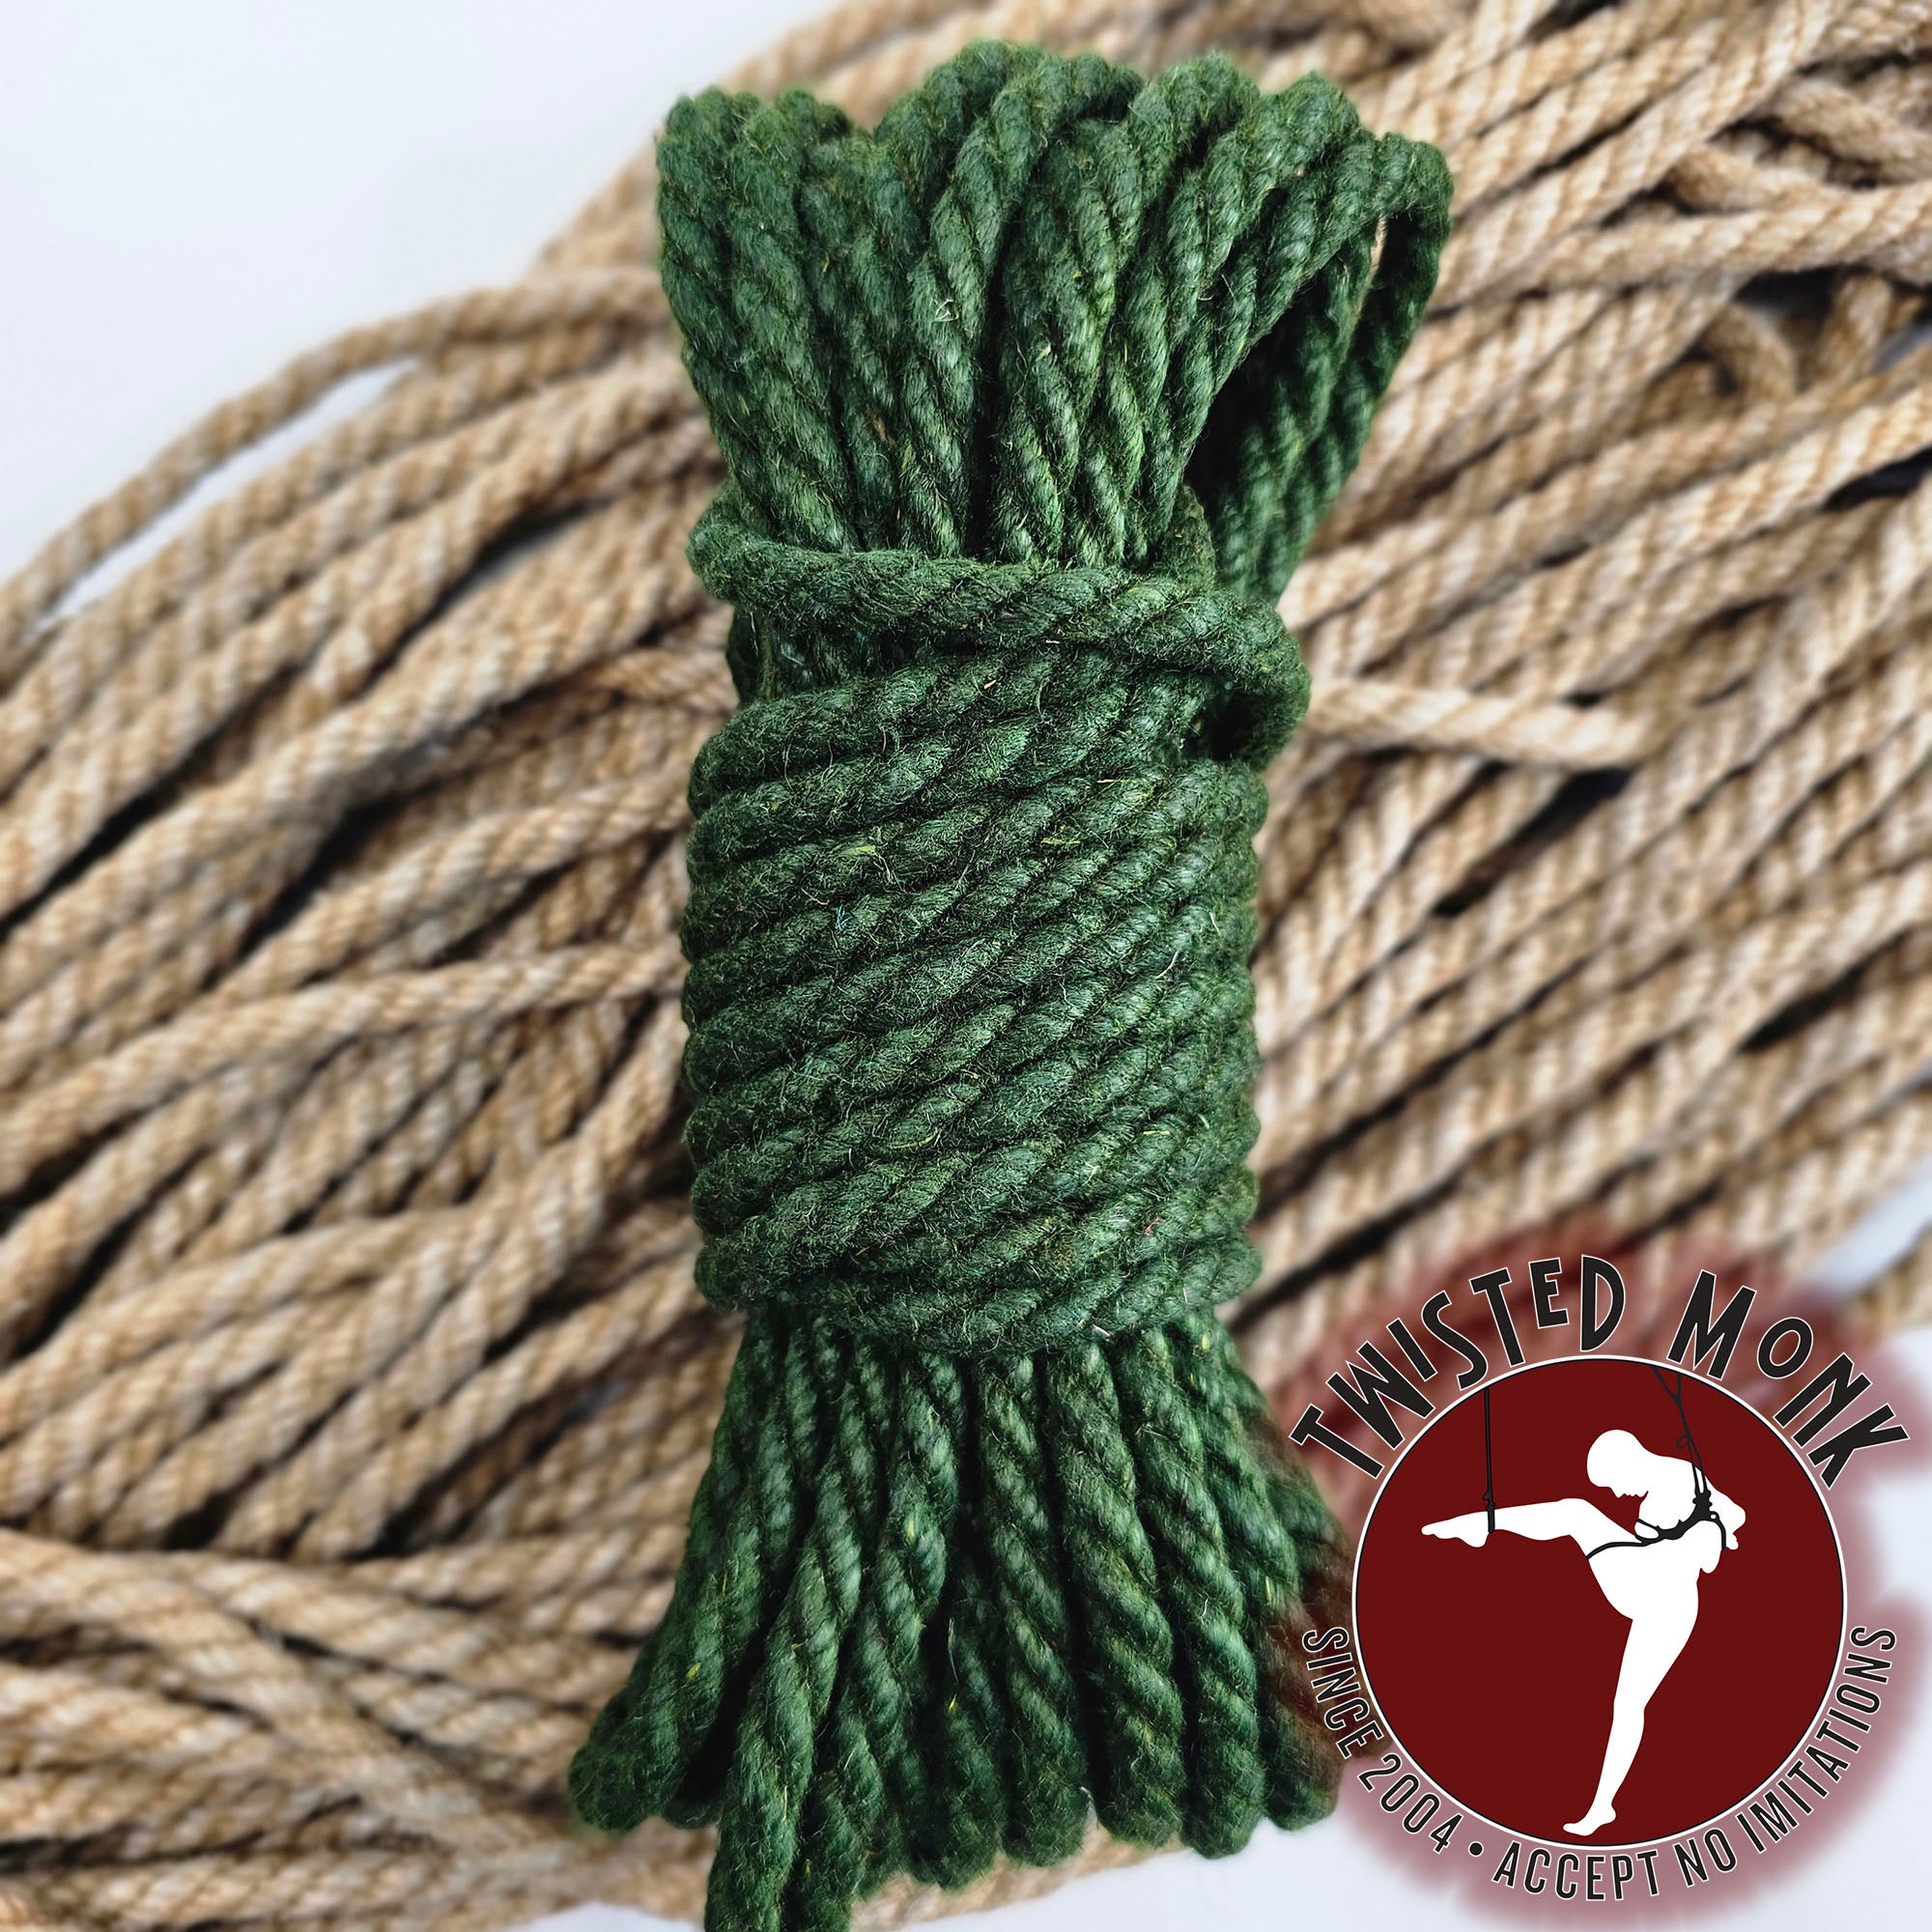 Green Hemp Rope - The Twisted Monk